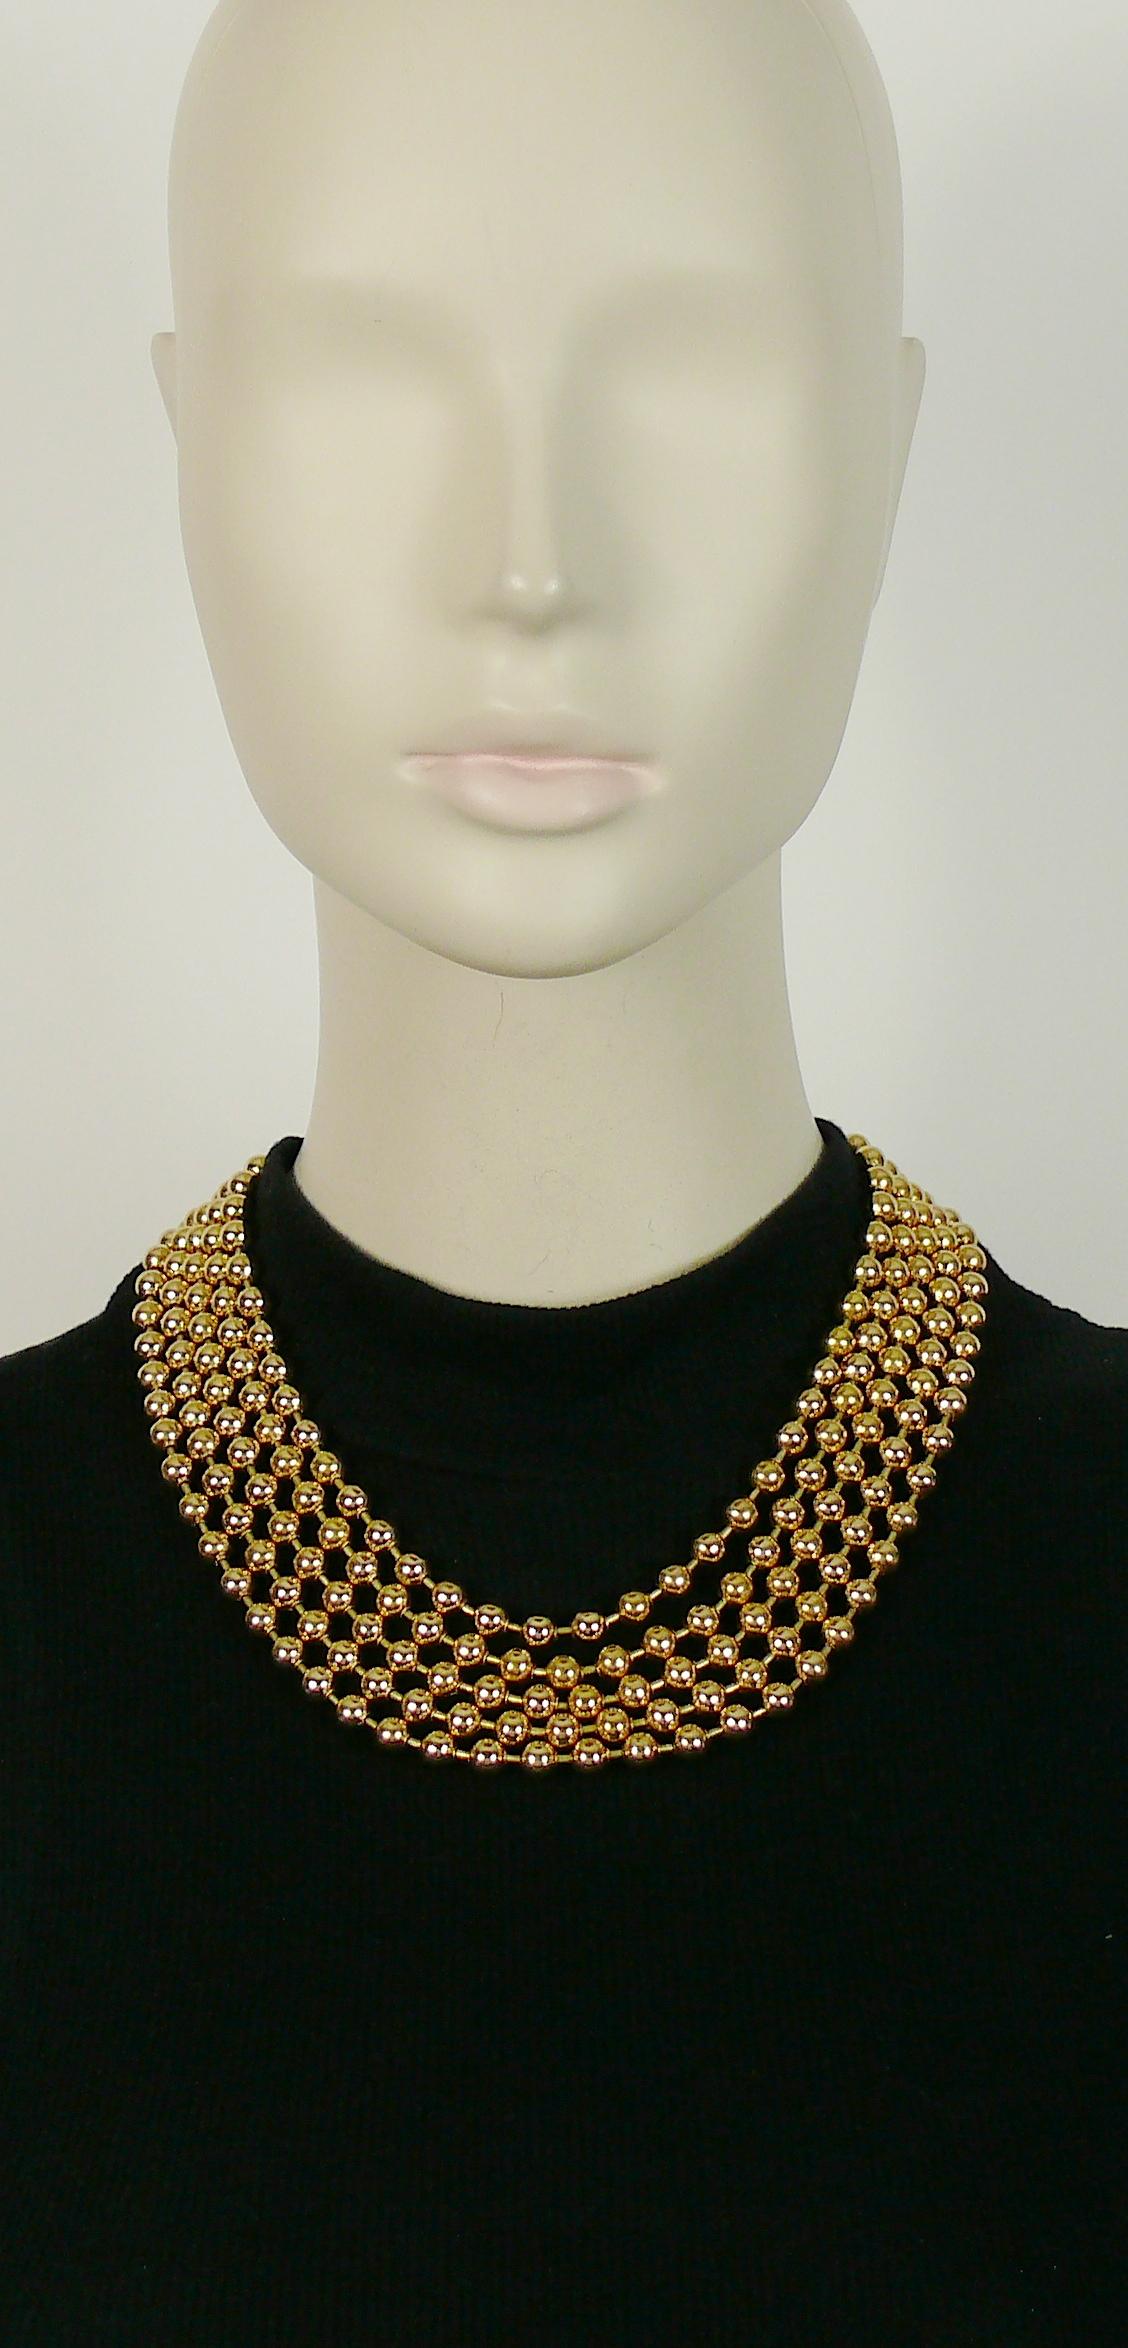 CHRISTIAN DIOR vintage multi strand gold toned metal pearls necklace.

T-bar and toggle closure.

Marked CHR. DIOR.

Indicative measurements : length approx. 46 cm (18.11 inches).

NOTES
- This is a preloved vintage item, therefore it might have